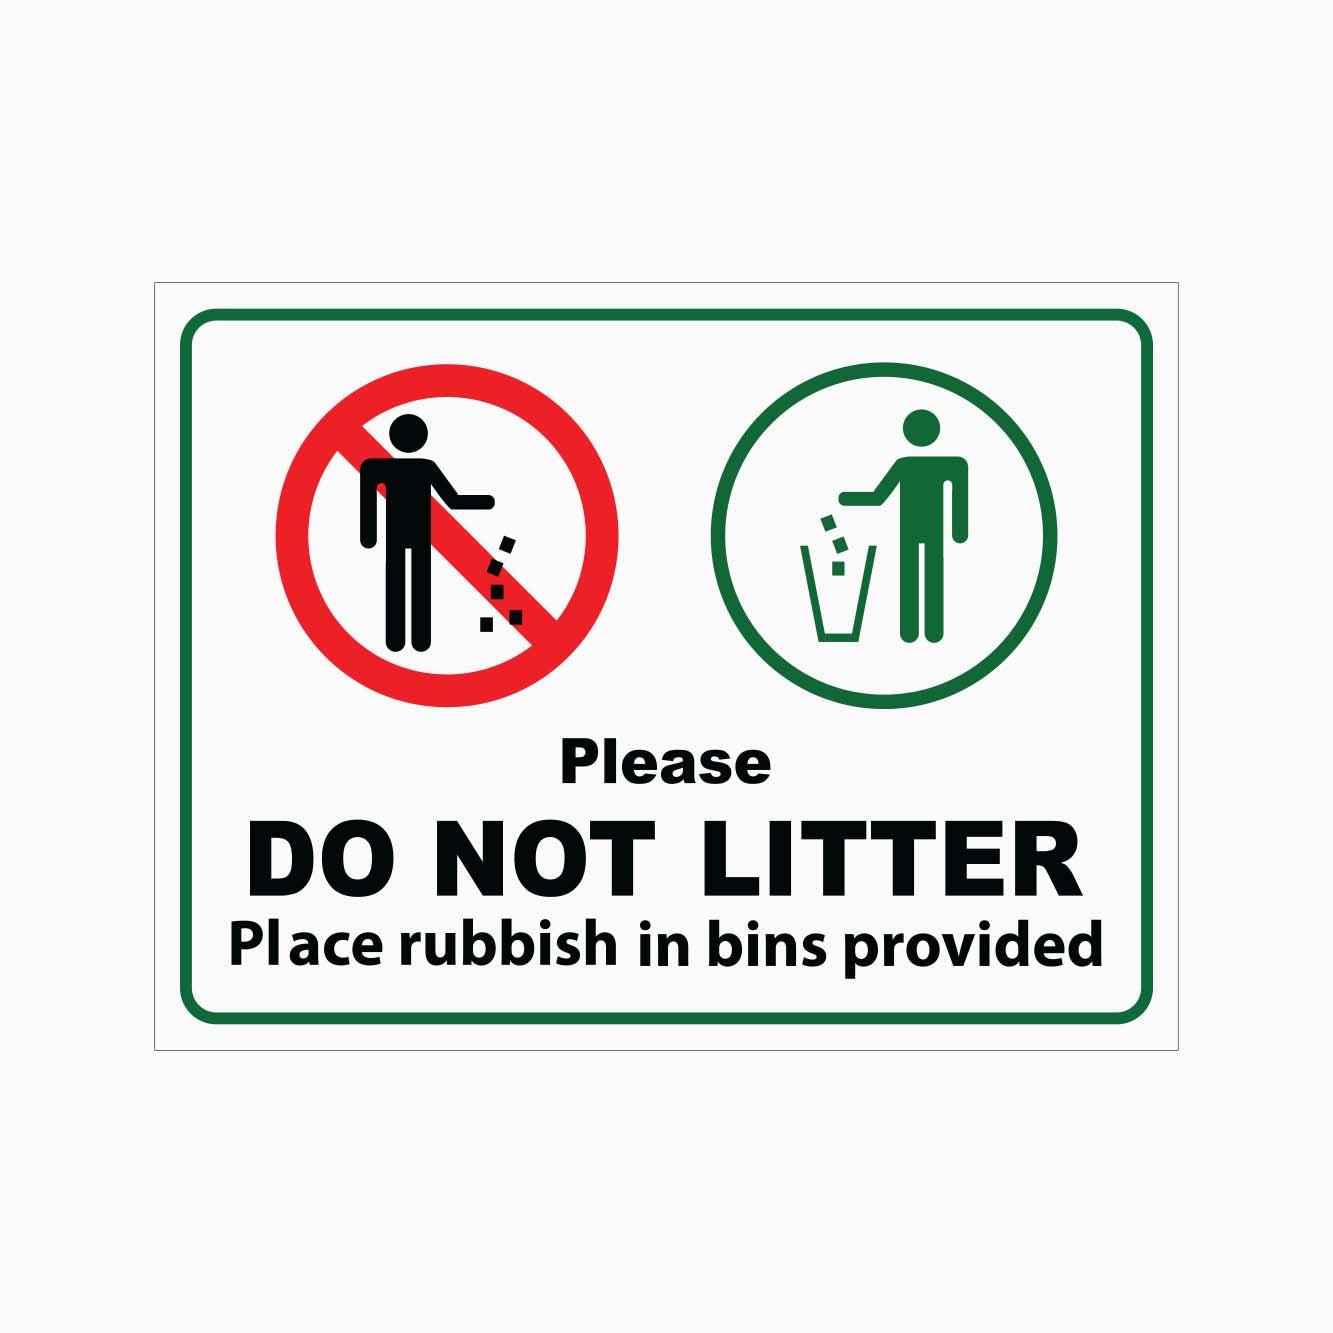 PLEASE DO NOT LITTER PLACE RUBBISH IN BINS PROVIDED SIGN - GET SIGNS